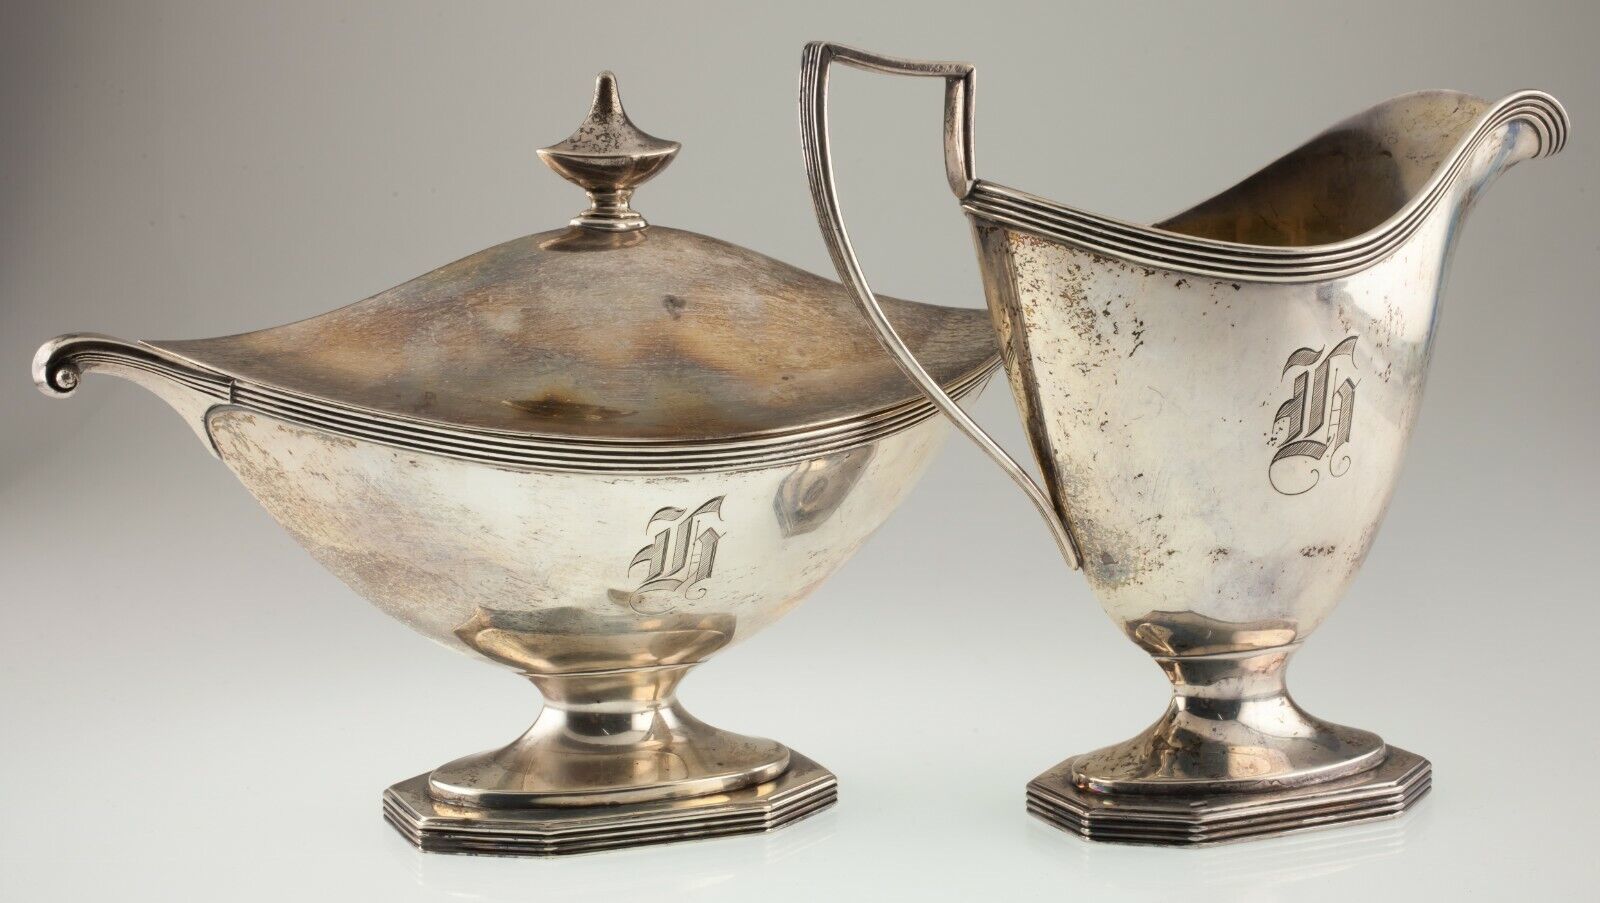 Gorham Sterling Silver Holloware Sugar and Creamer A9163 and A9164 - $935.55